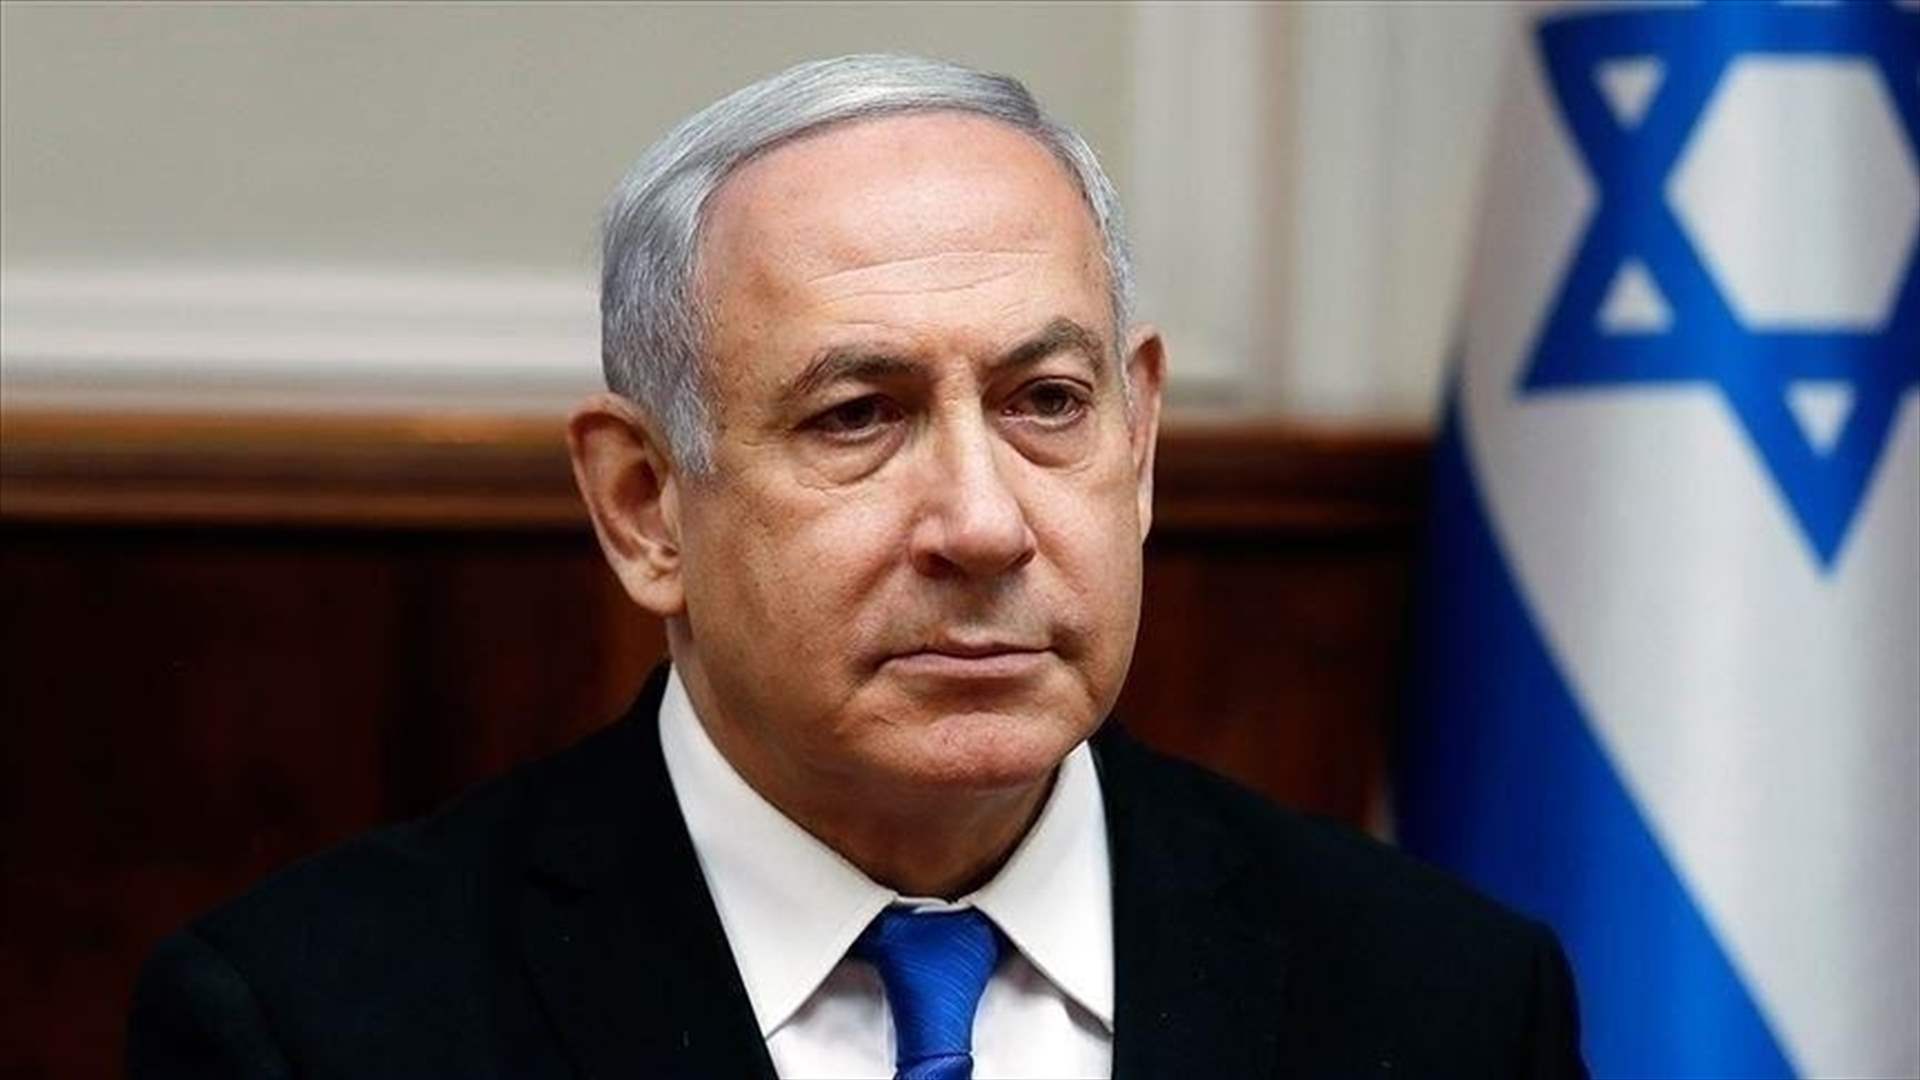 Netanyahu discharged from hospital after heart pacemaker implant surgery